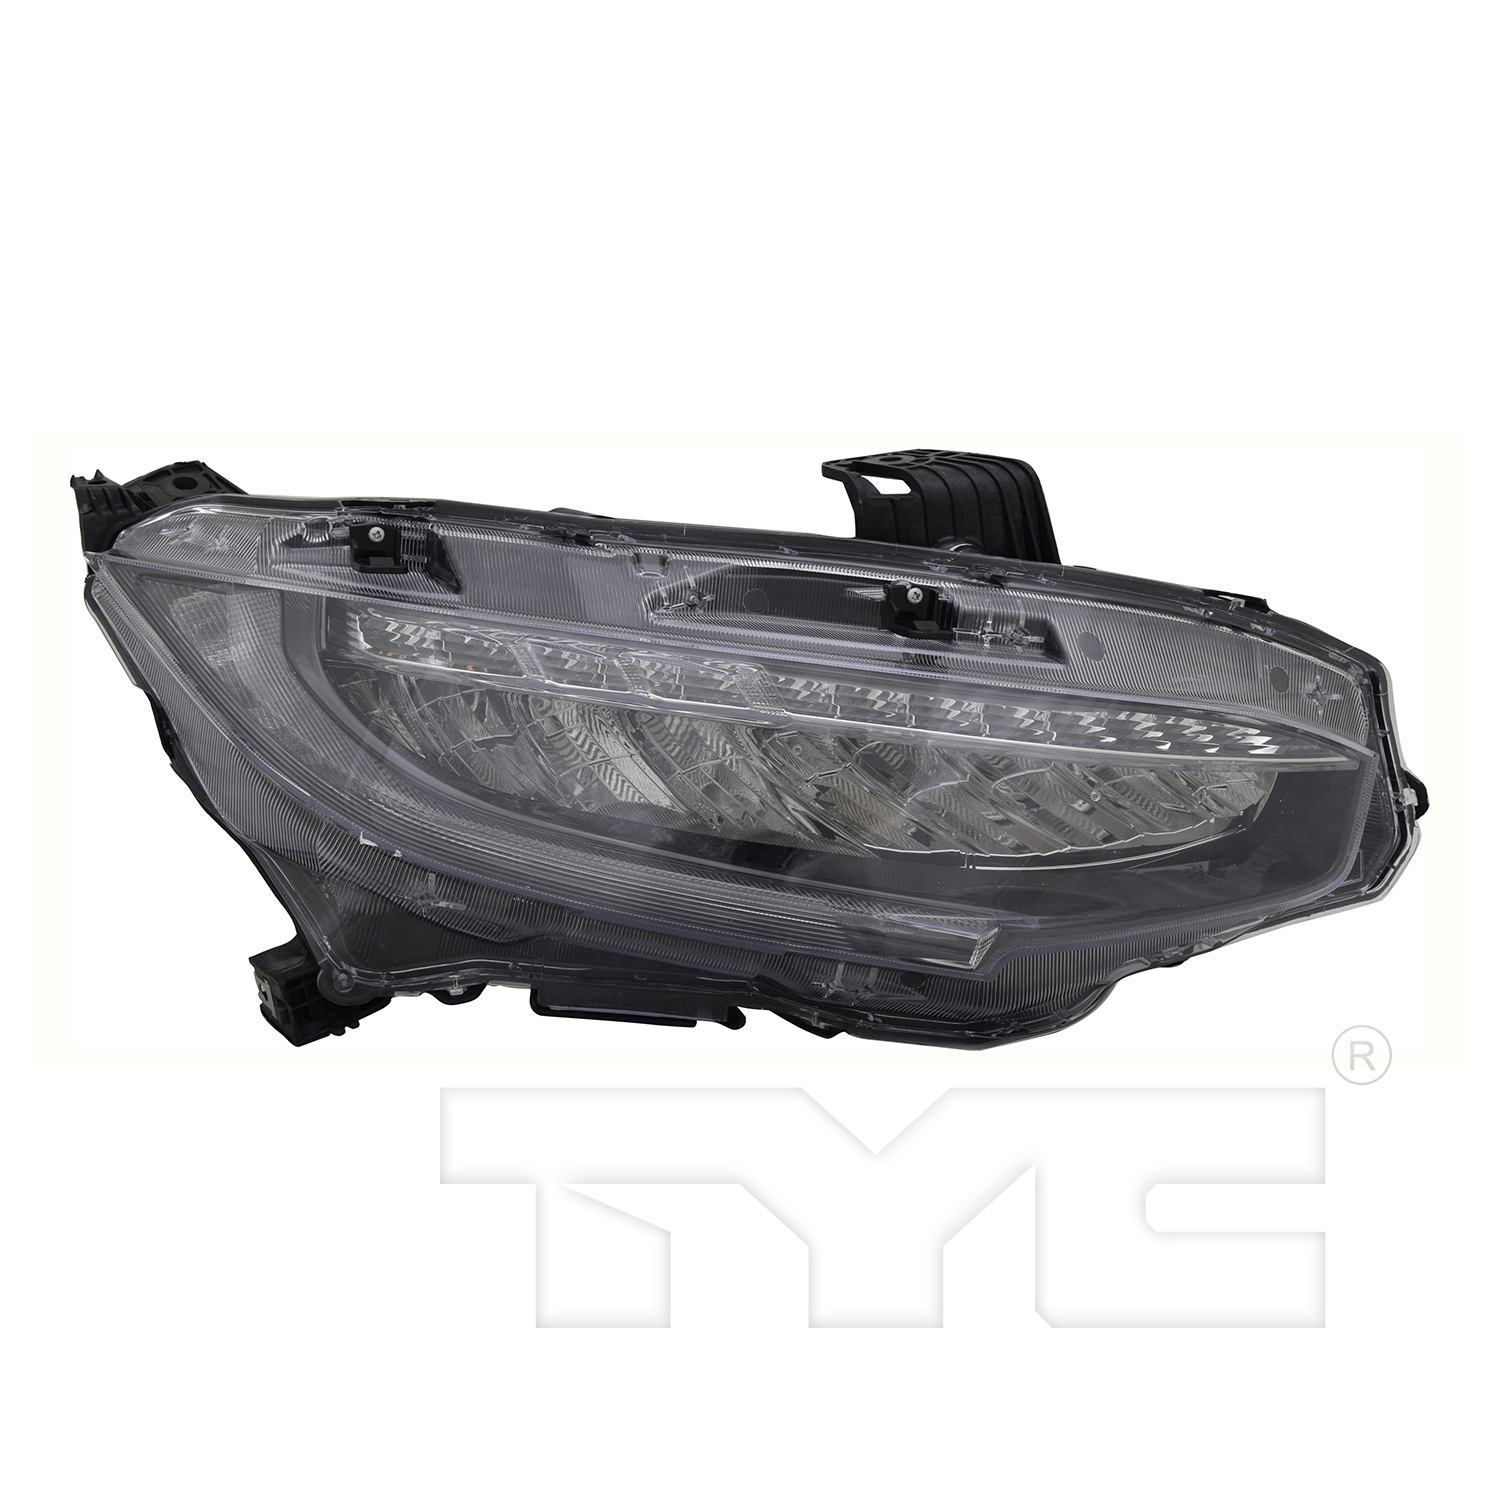 Aftermarket HEADLIGHTS for HONDA - CIVIC, CIVIC,17-19,RT Headlamp assy composite